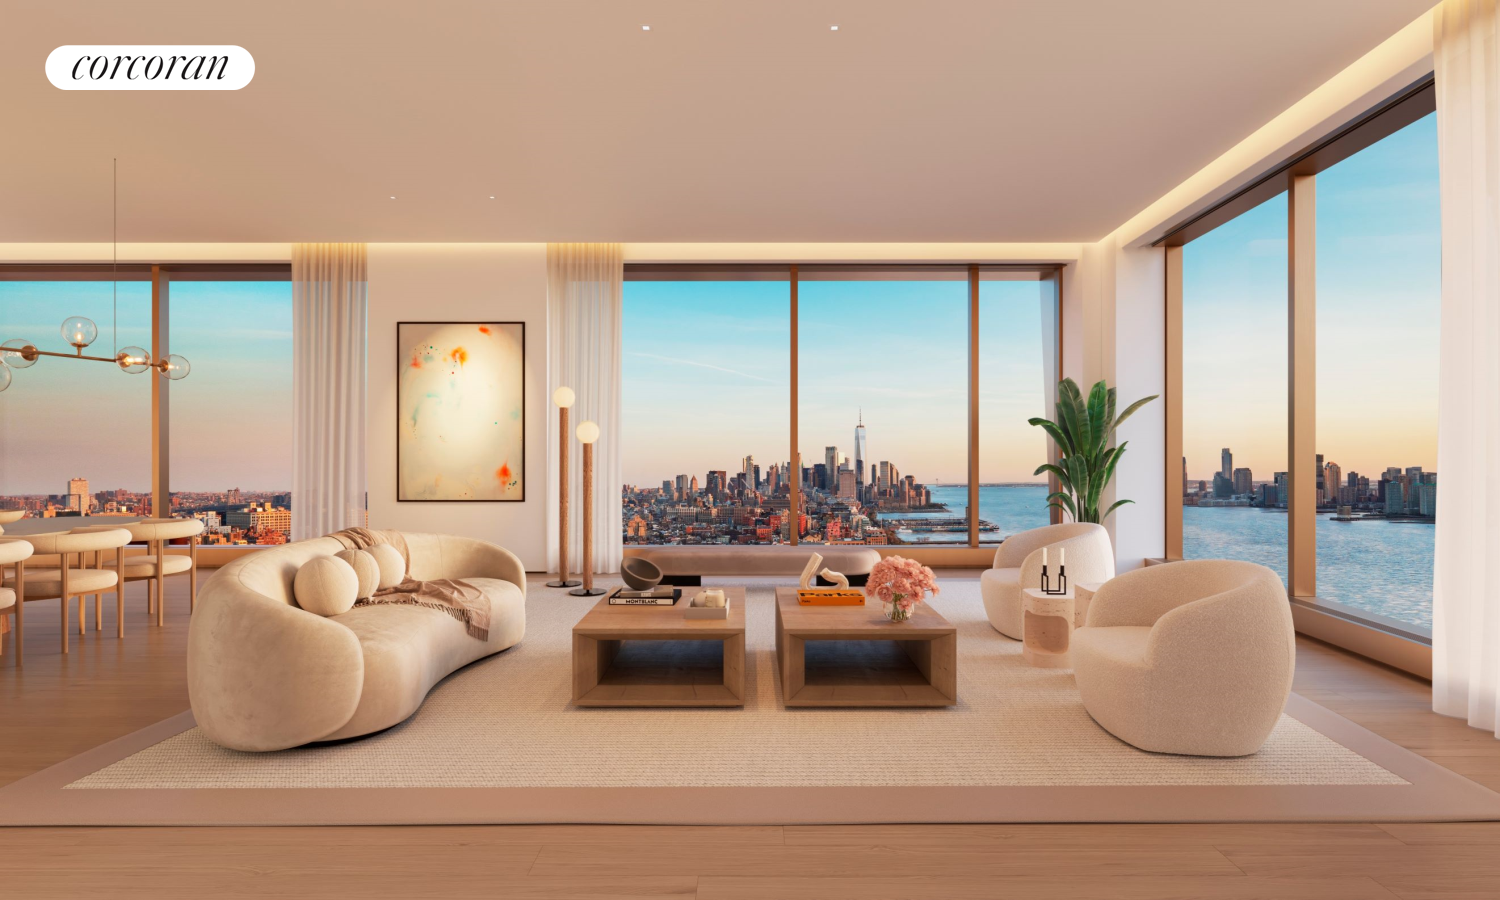 500 West 18th Street West 23D, Chelsea, Downtown, NYC - 4 Bedrooms  
4.5 Bathrooms  
6 Rooms - 